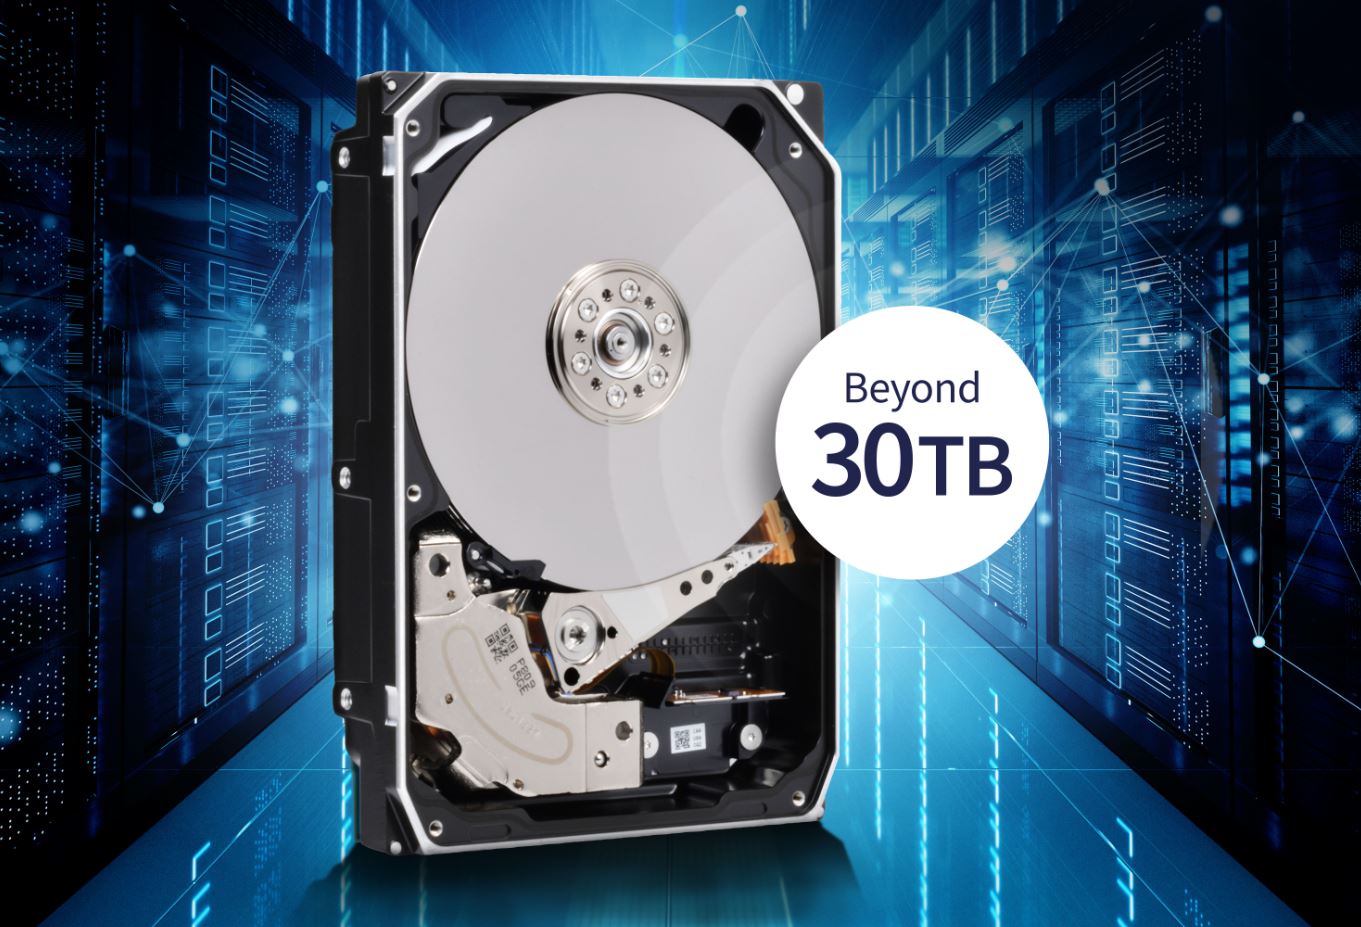 Toshiba Successfully Demonstrates Nearline HDDs with Massive Capacity of Over 30 Terabytes